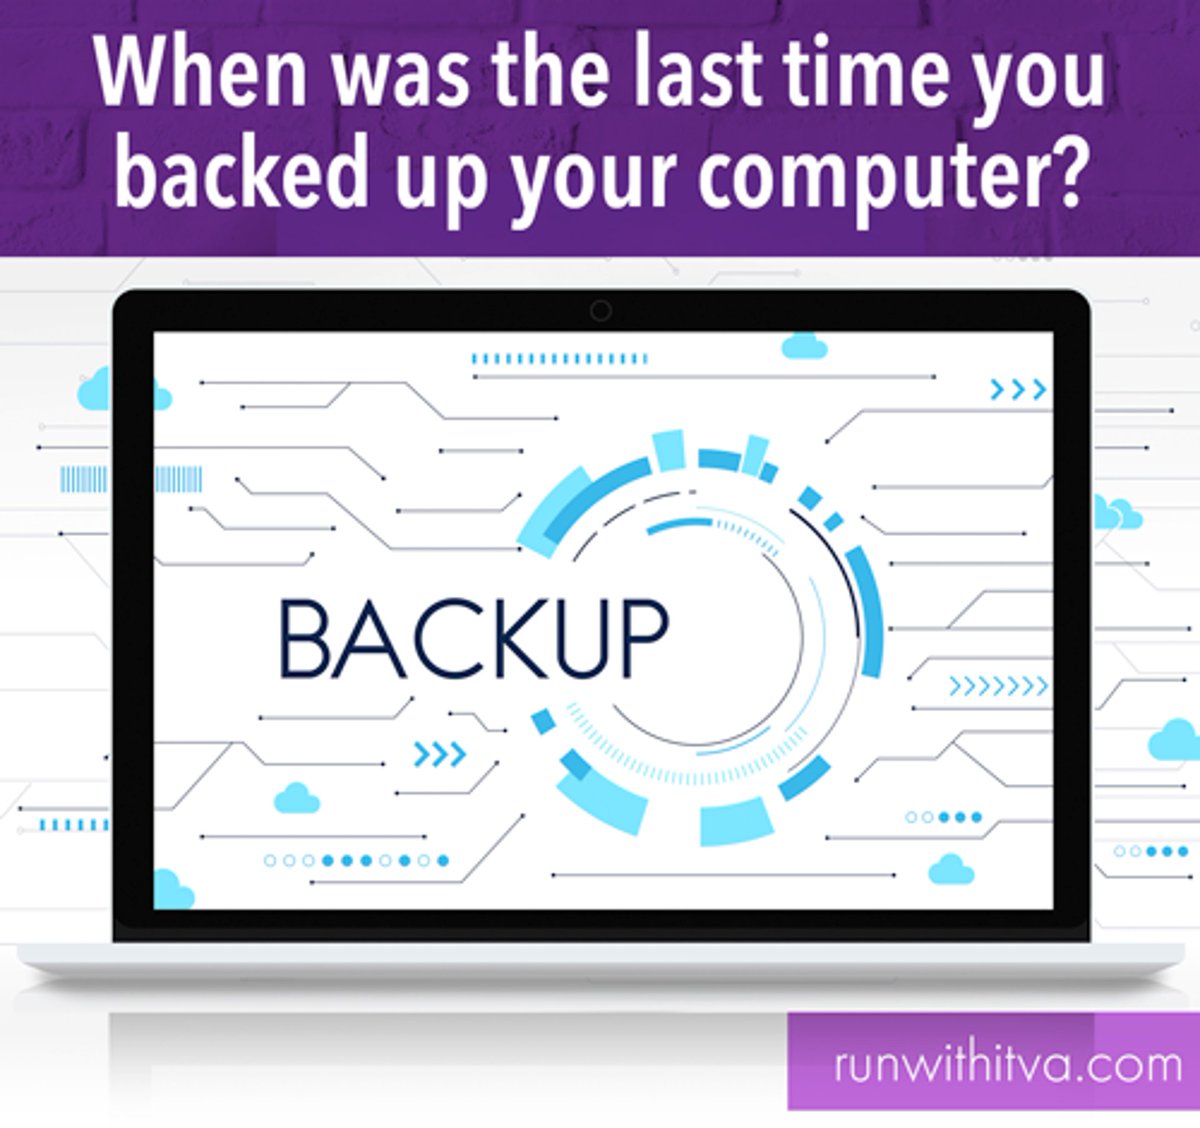 There are ways to automate backing up your computer, so you don't have to think about it!

#personalassistant #virtualassistanthelp #onlinebusinesssupport